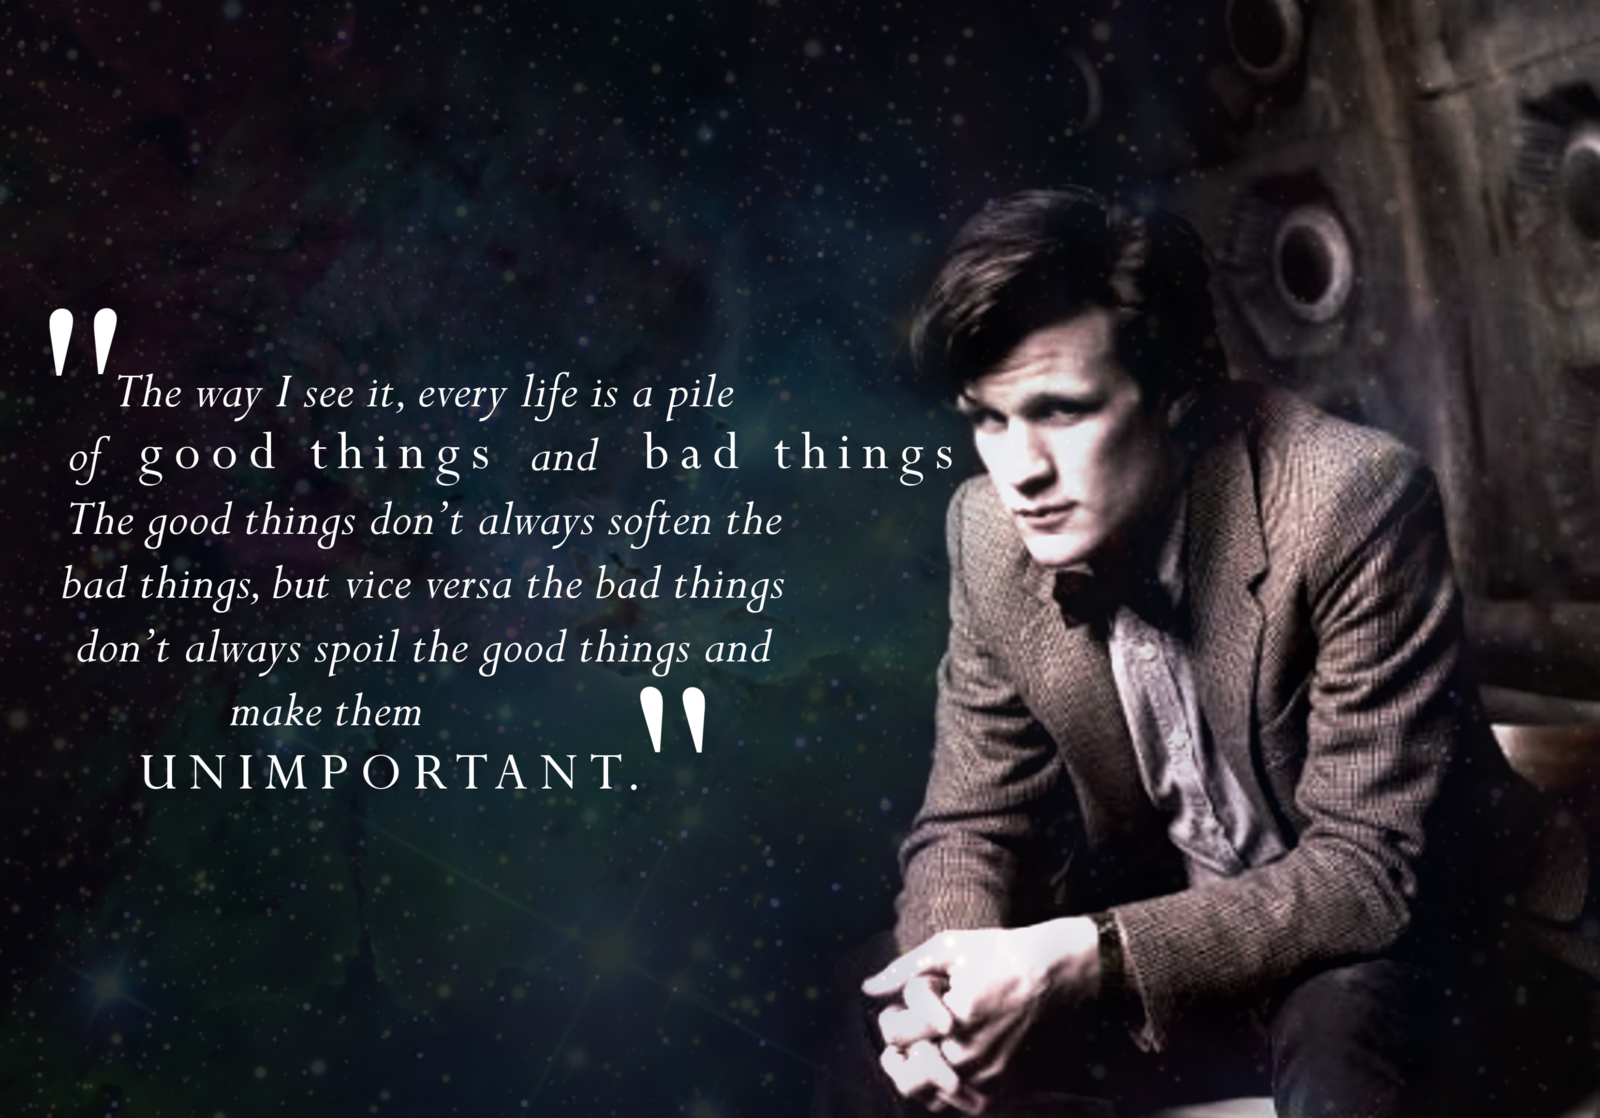 Doctor Who 11th Doctor Wallpaper Eleventh doctor wallpaper by 1600x1118